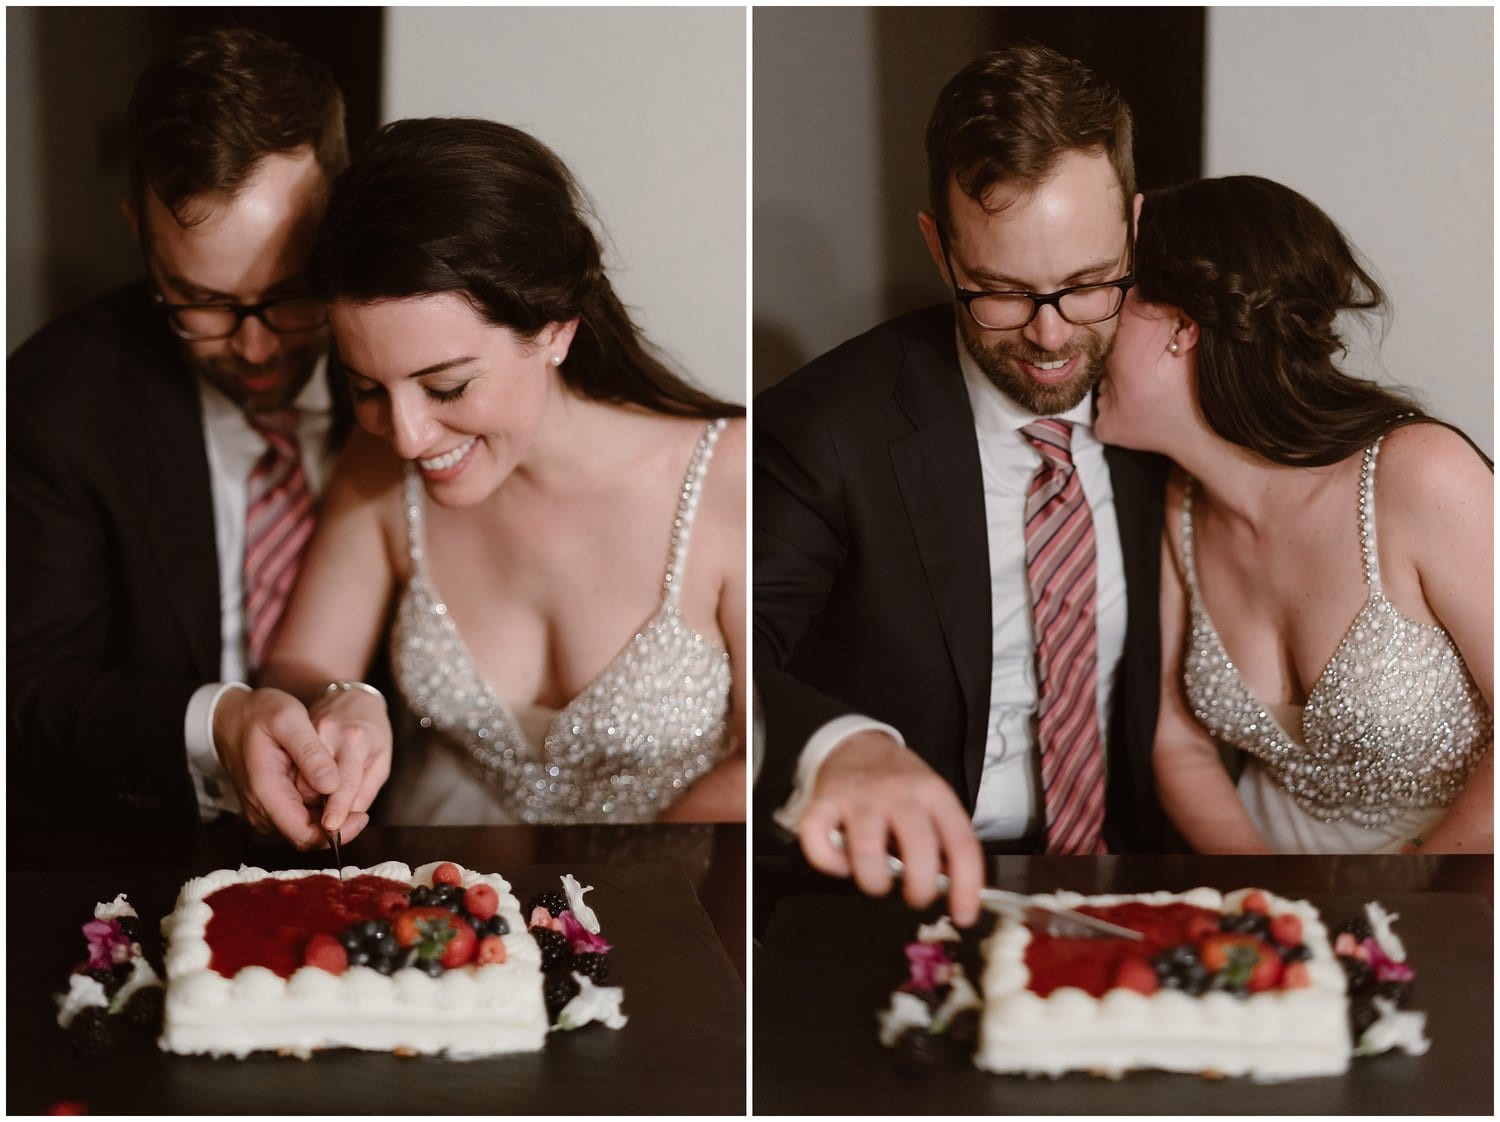 Bride and groom cut their cake together. 